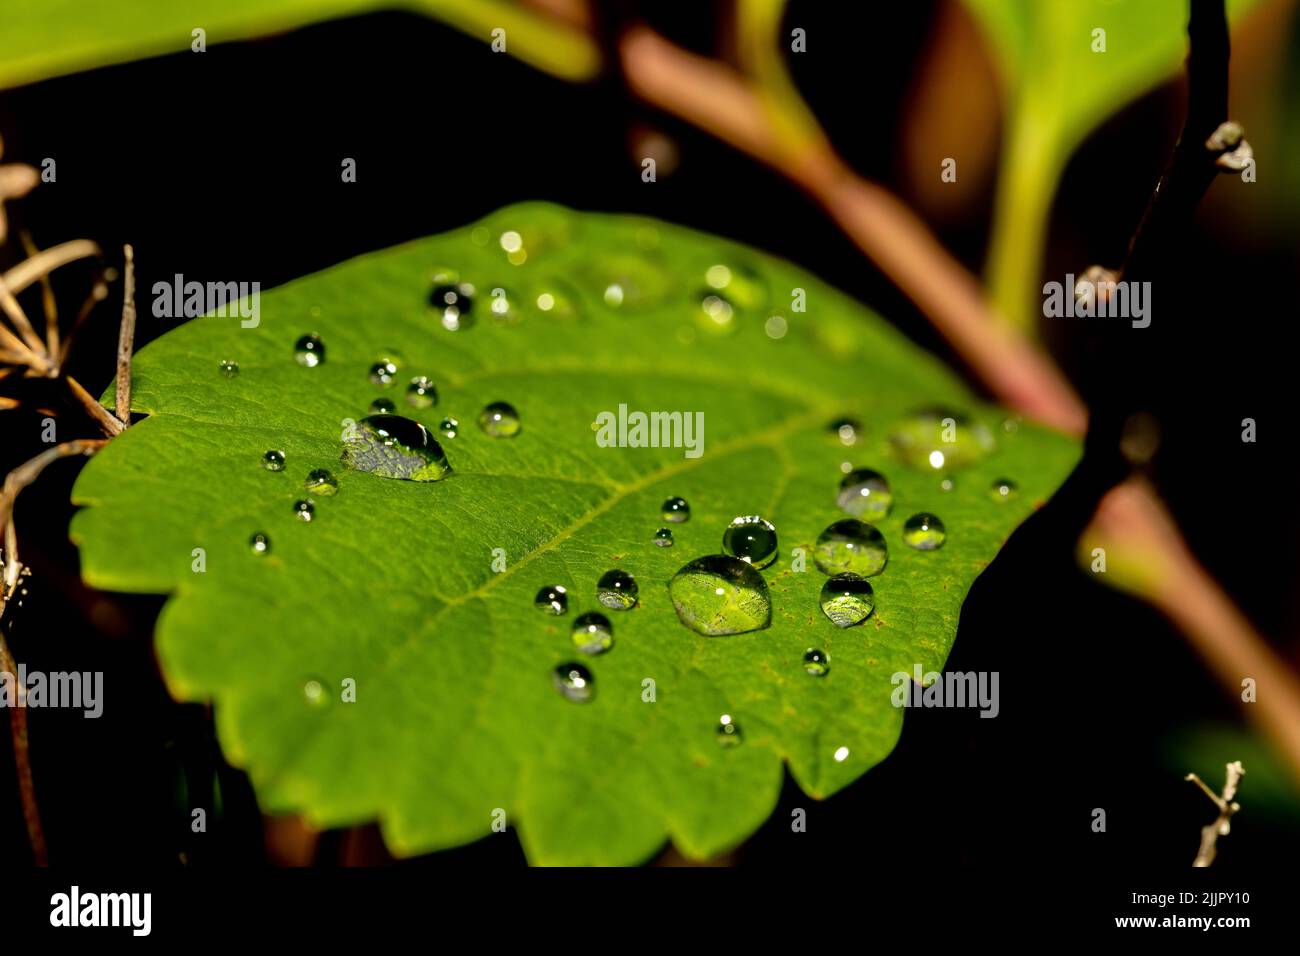 A closeup shot of water droplets on a green leaf Stock Photo